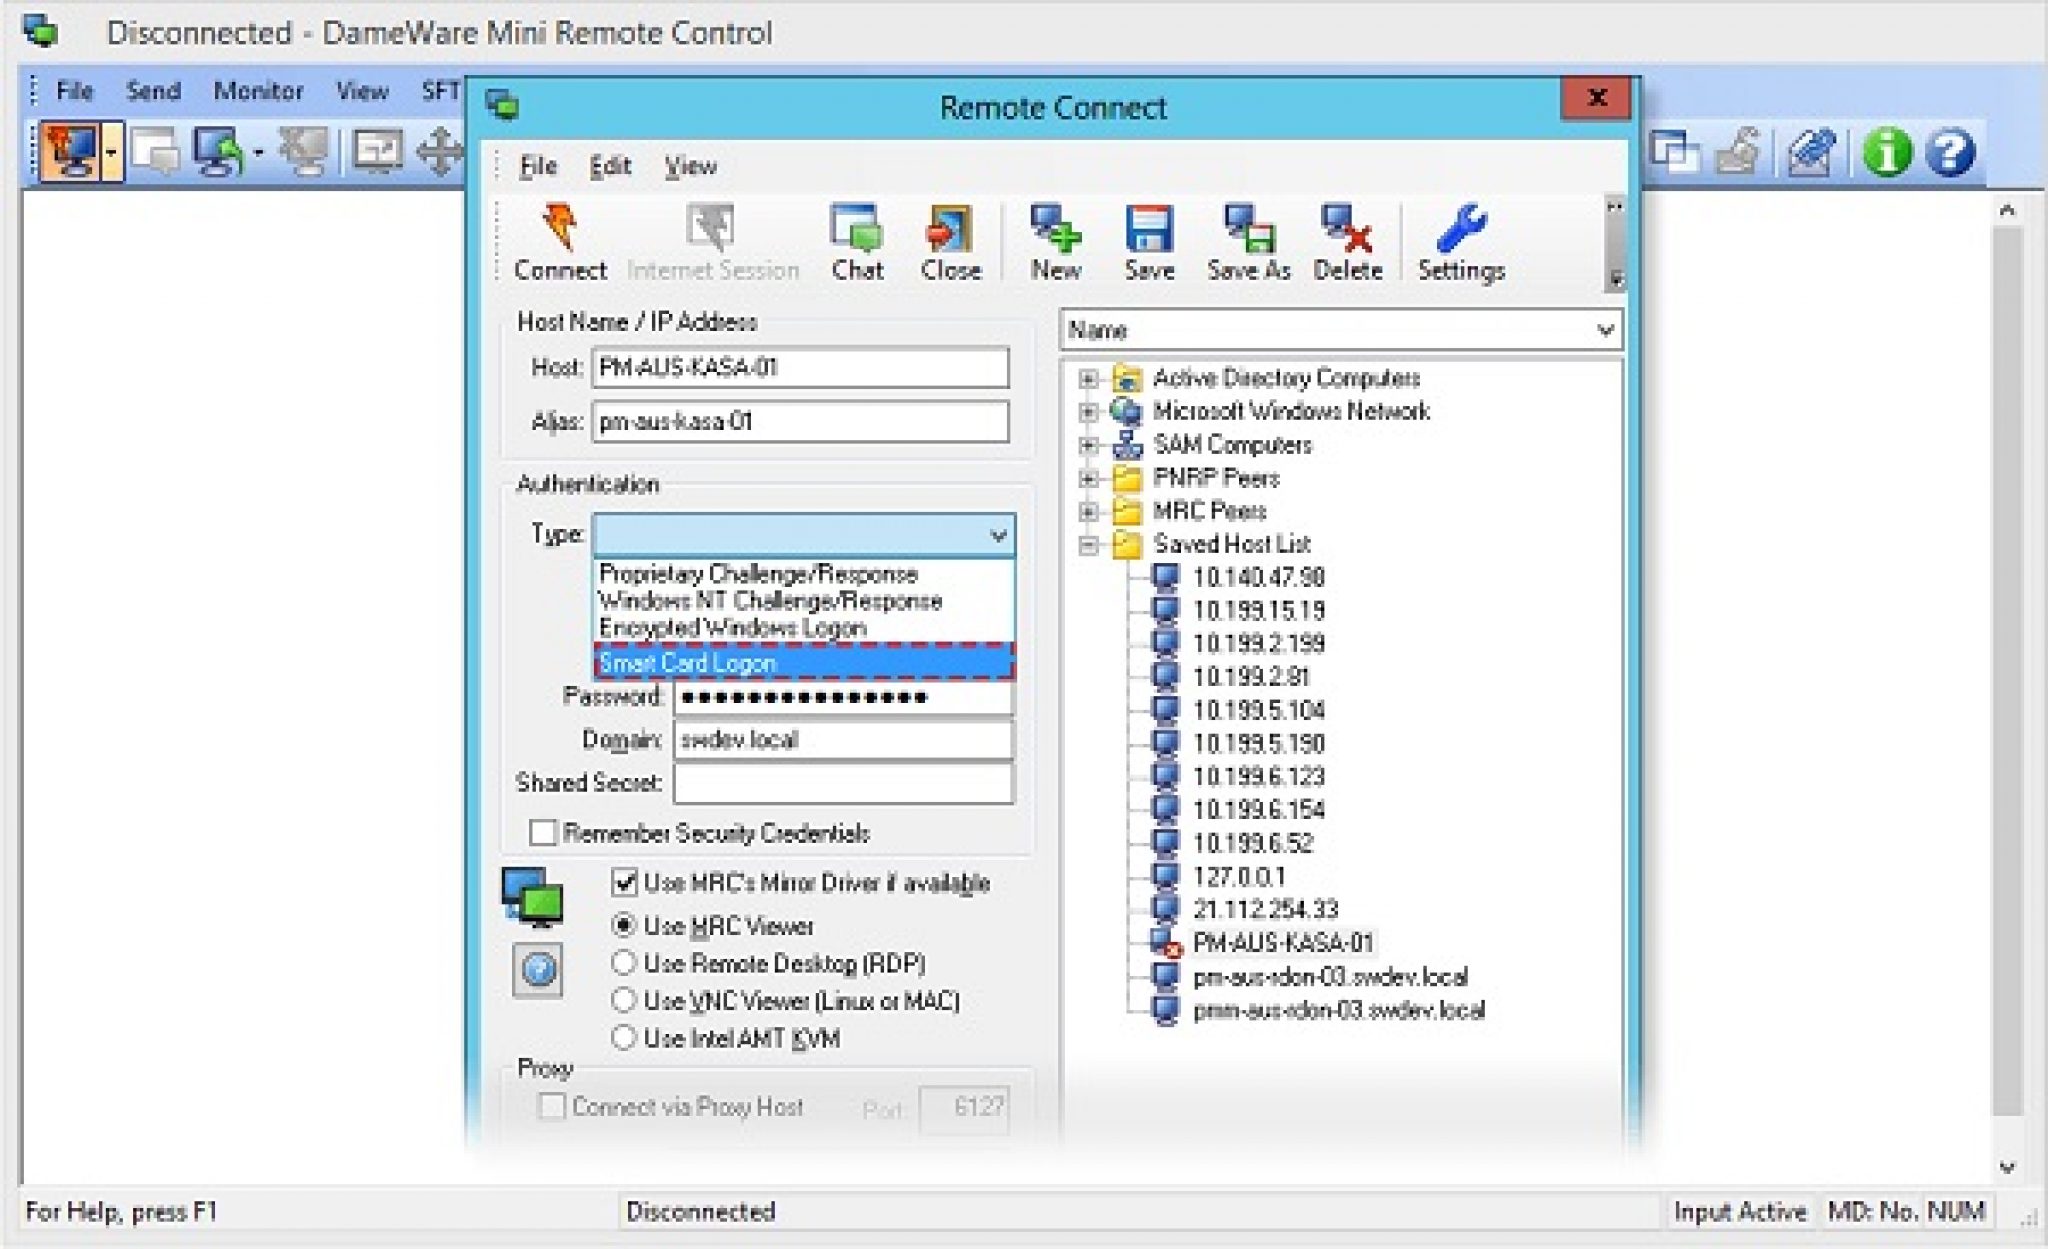 DameWare Remote Support 12.3.0.42 for windows instal